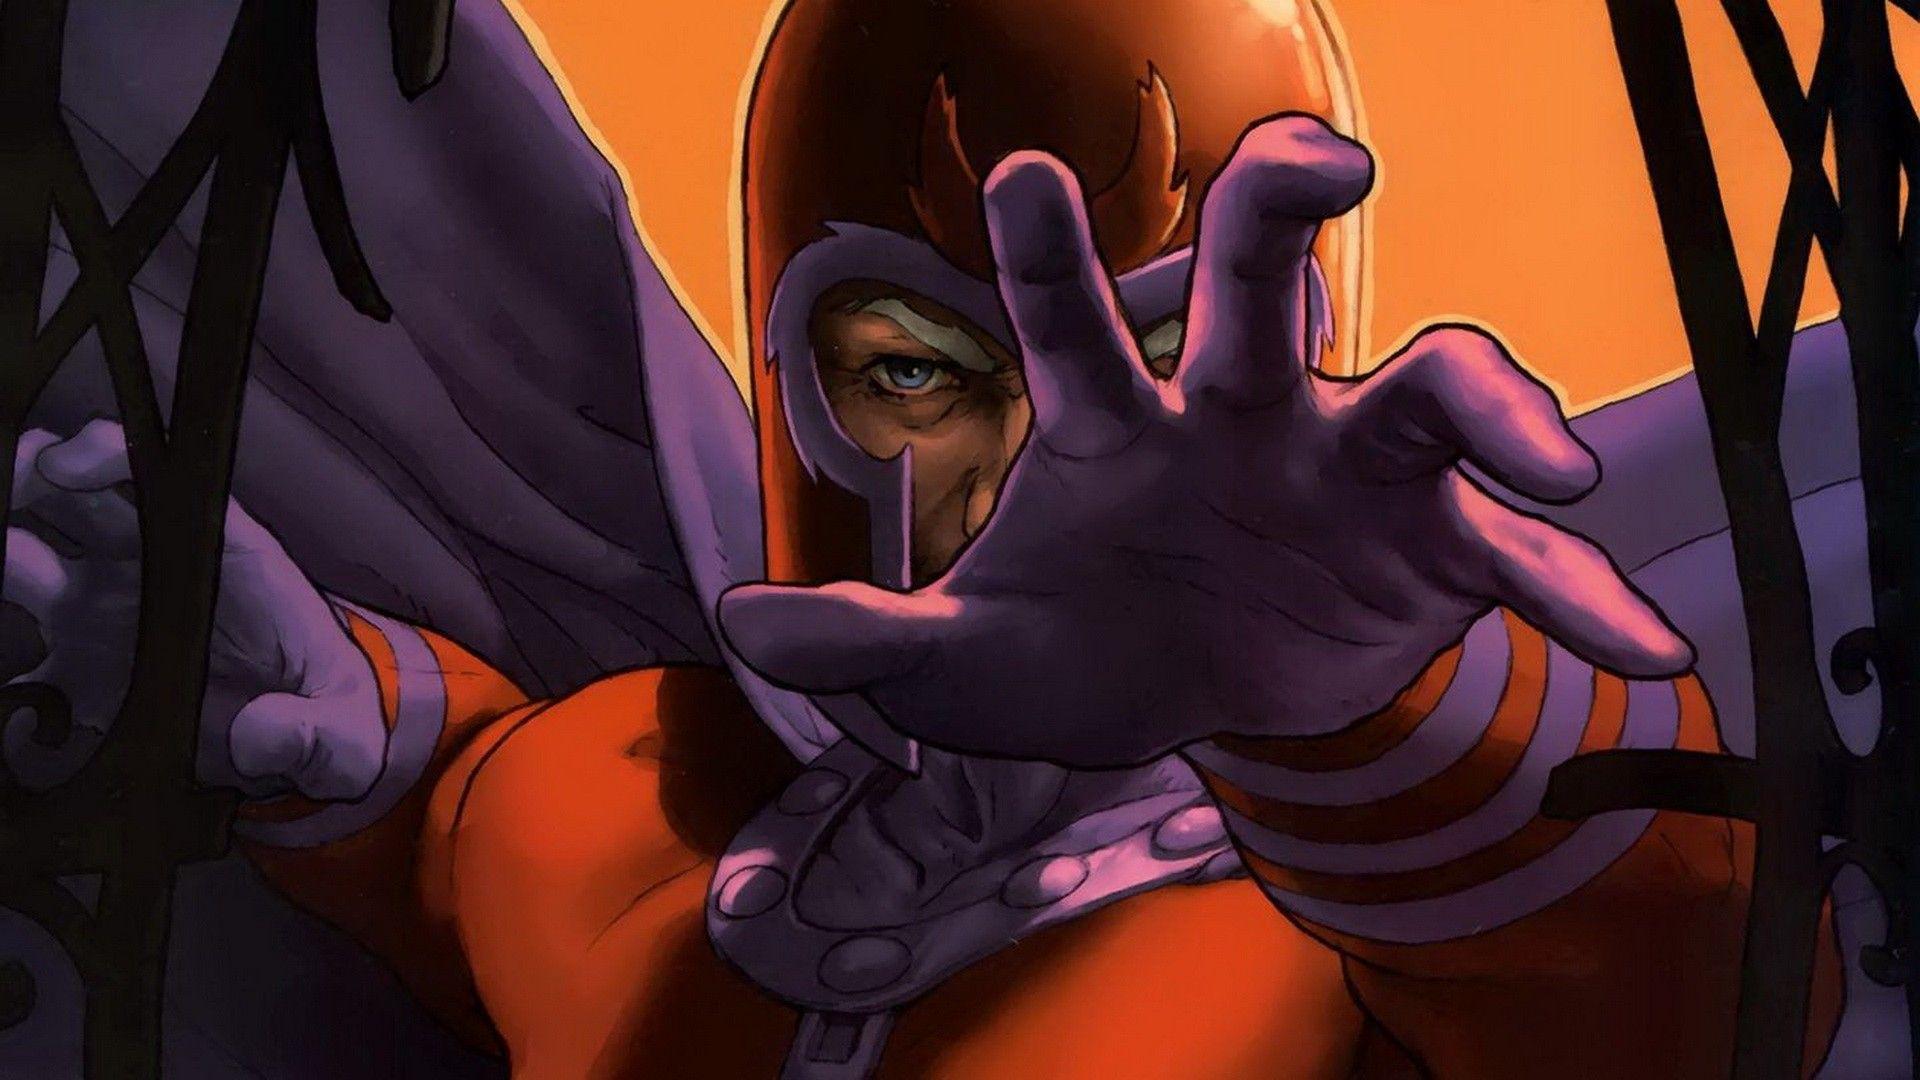 Magneto Wallpapers With Hand Of Lifting Amd Move Power Wallpapers